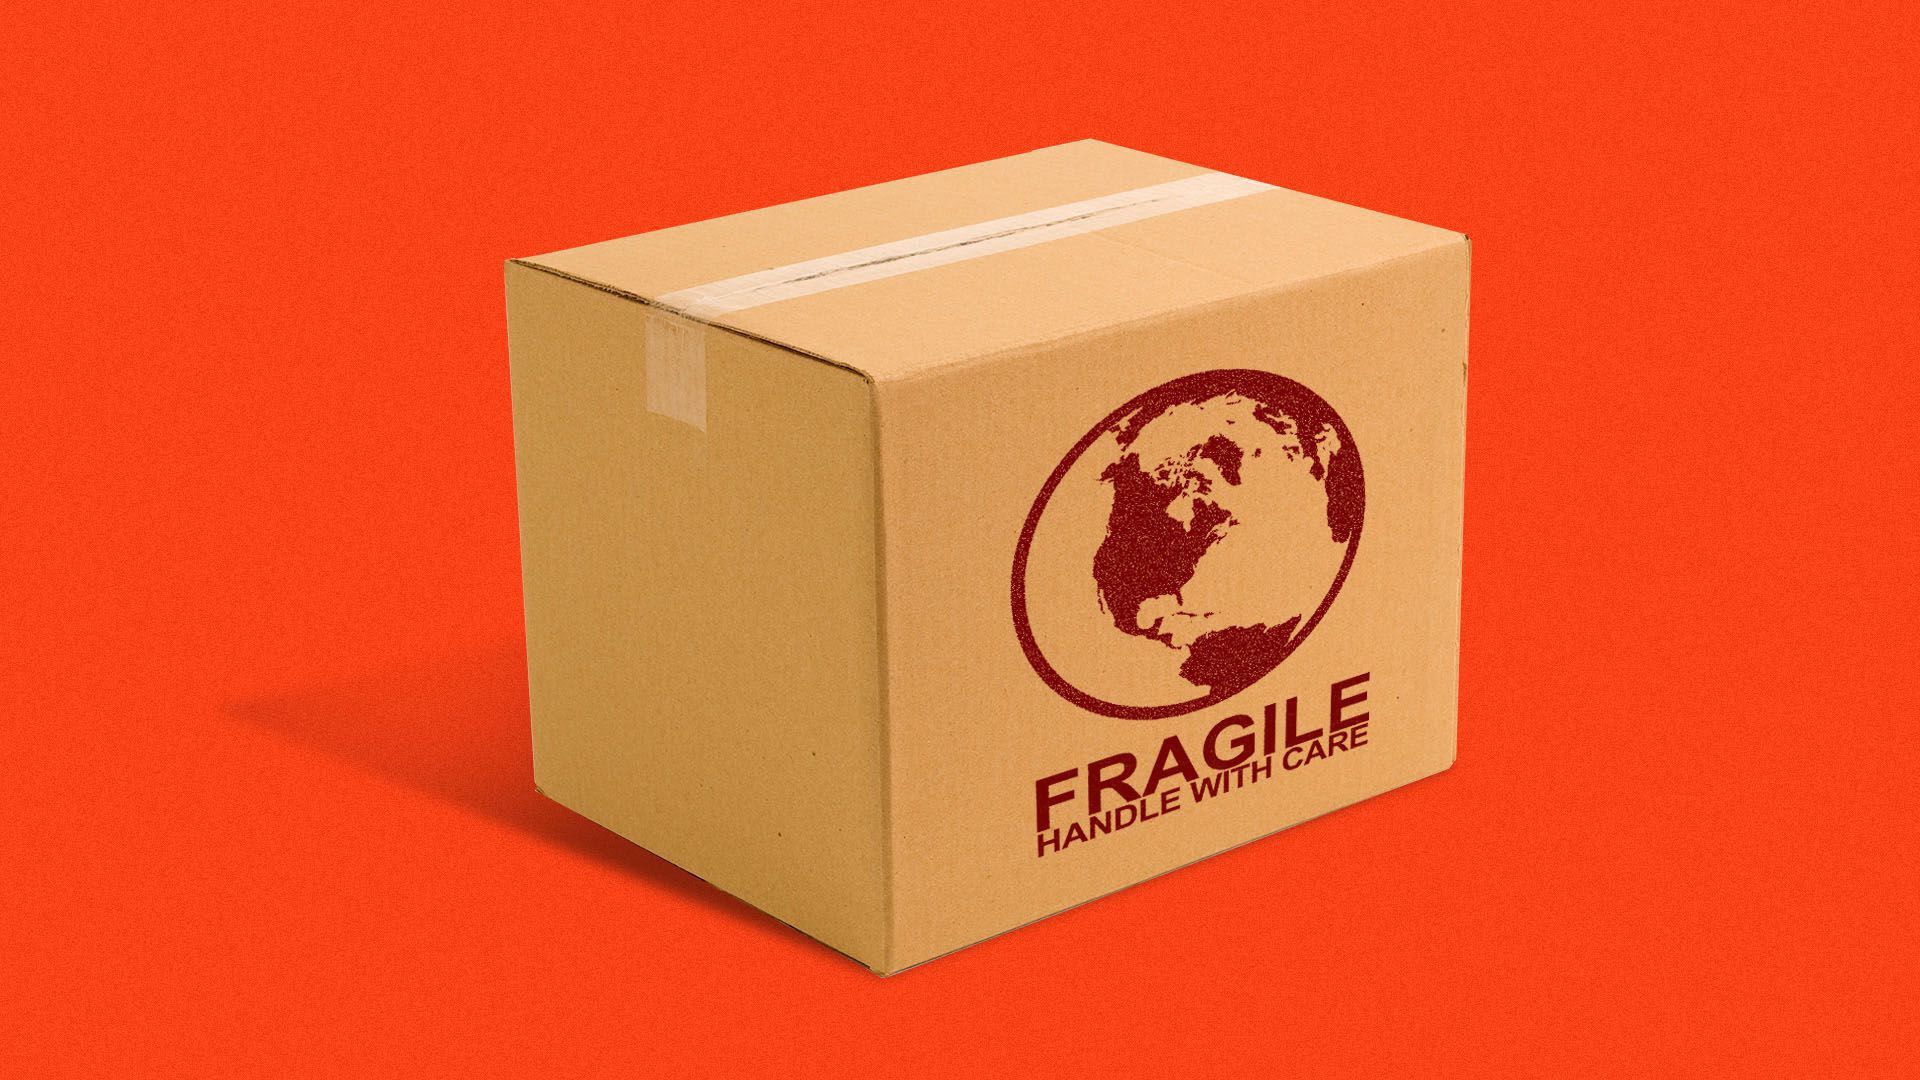 a box that says fragile and has a globe on it